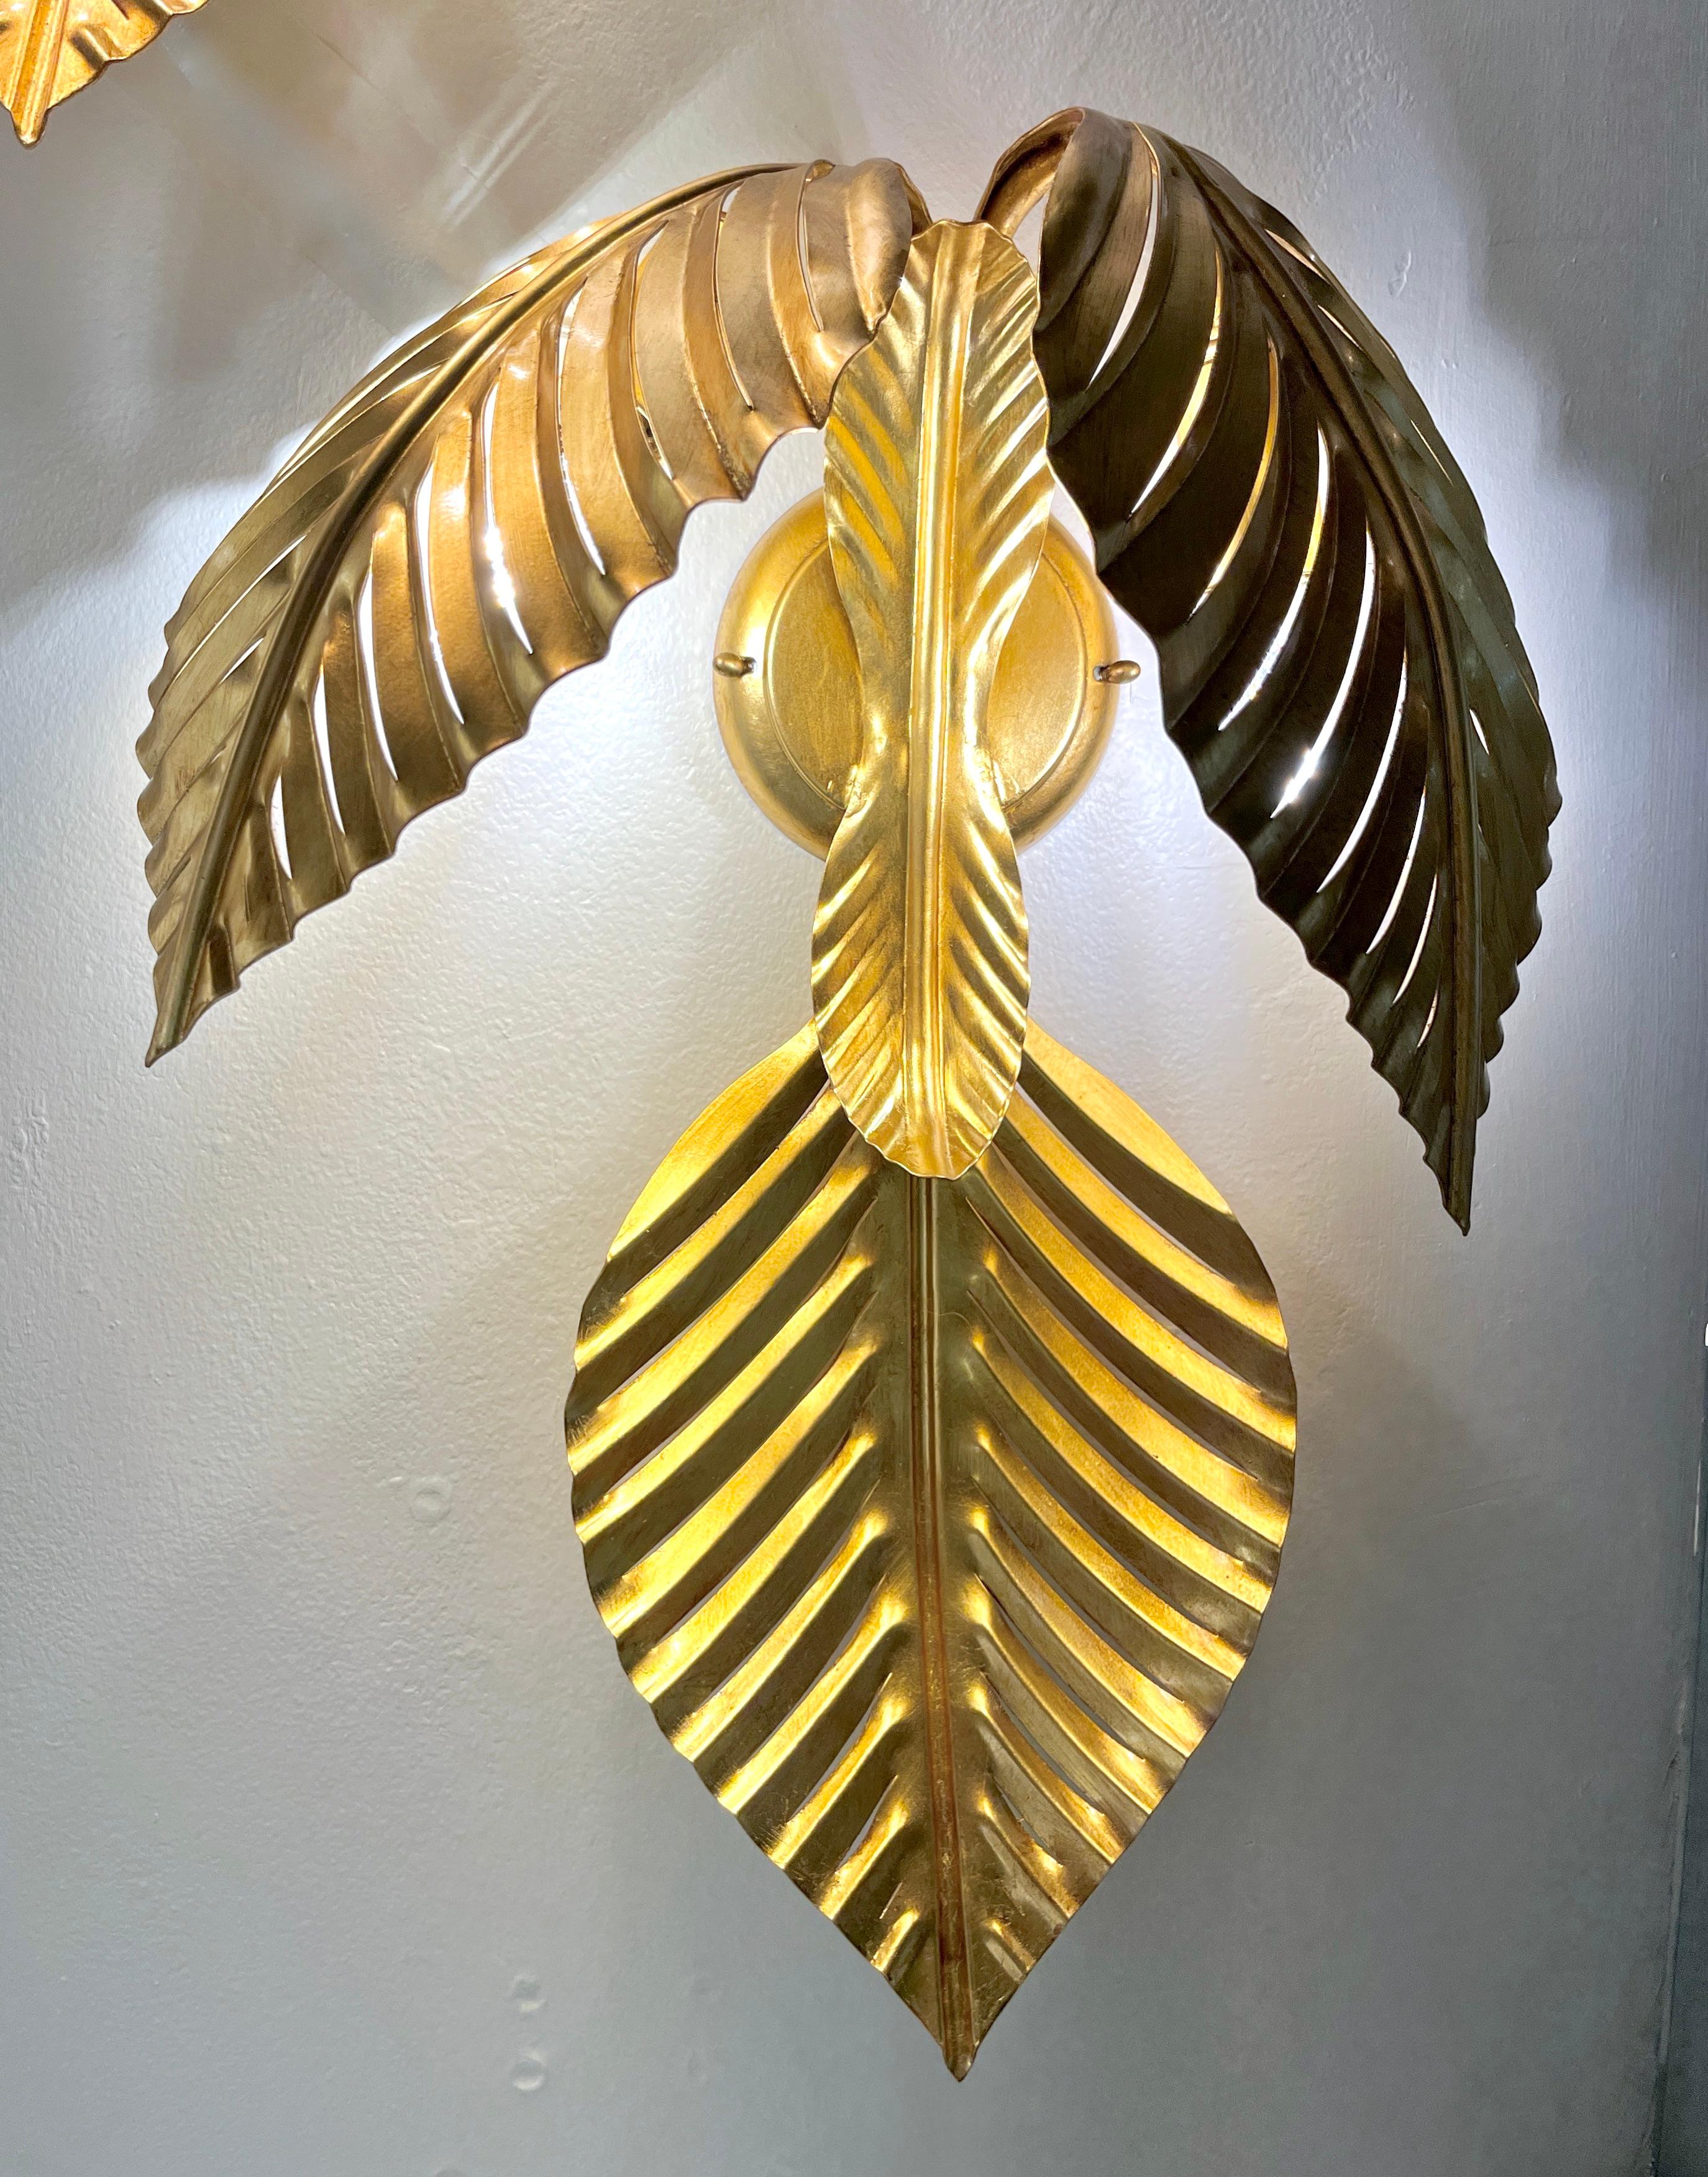 Hand-Crafted Contemporary Italian Art Deco Design Pair of Hand Made Gold Metal 3-Leaf Sconces For Sale